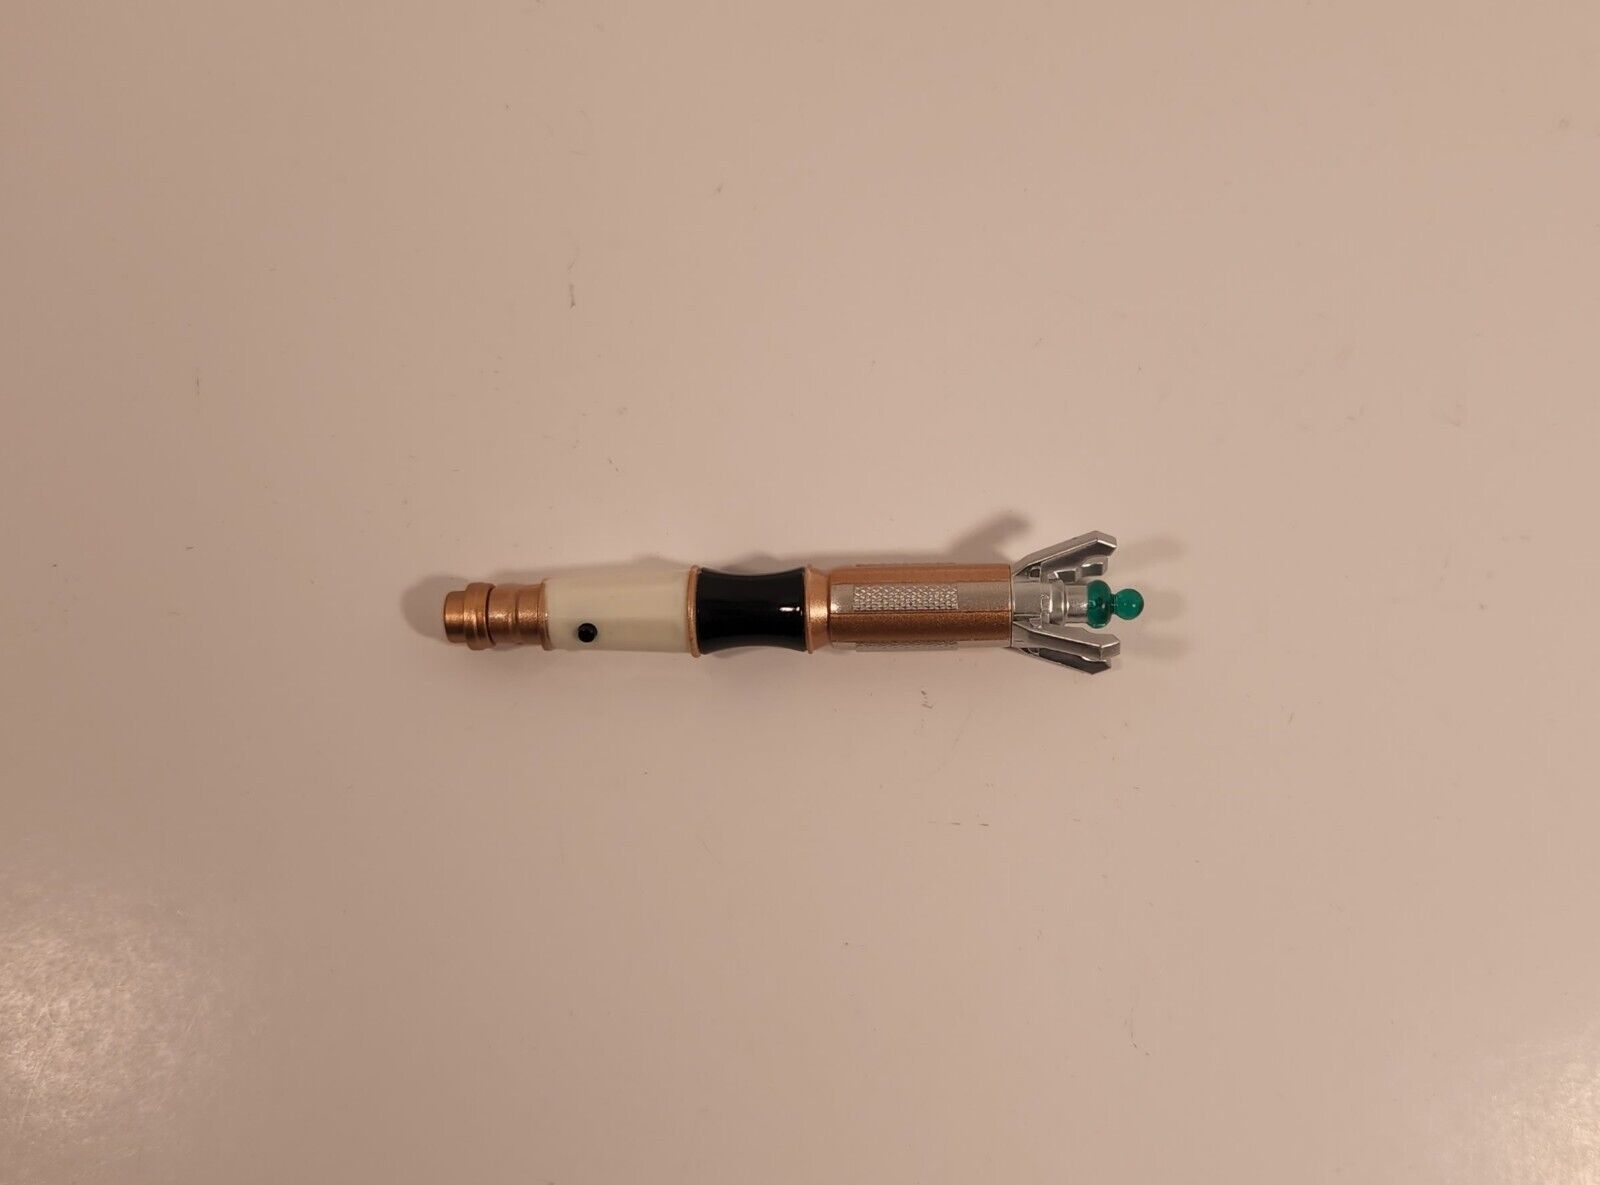 DOCTOR WHO 11TH DOCTOR SONIC SCREWDRIVER PART ONLY **NEEDS BATTERIES**